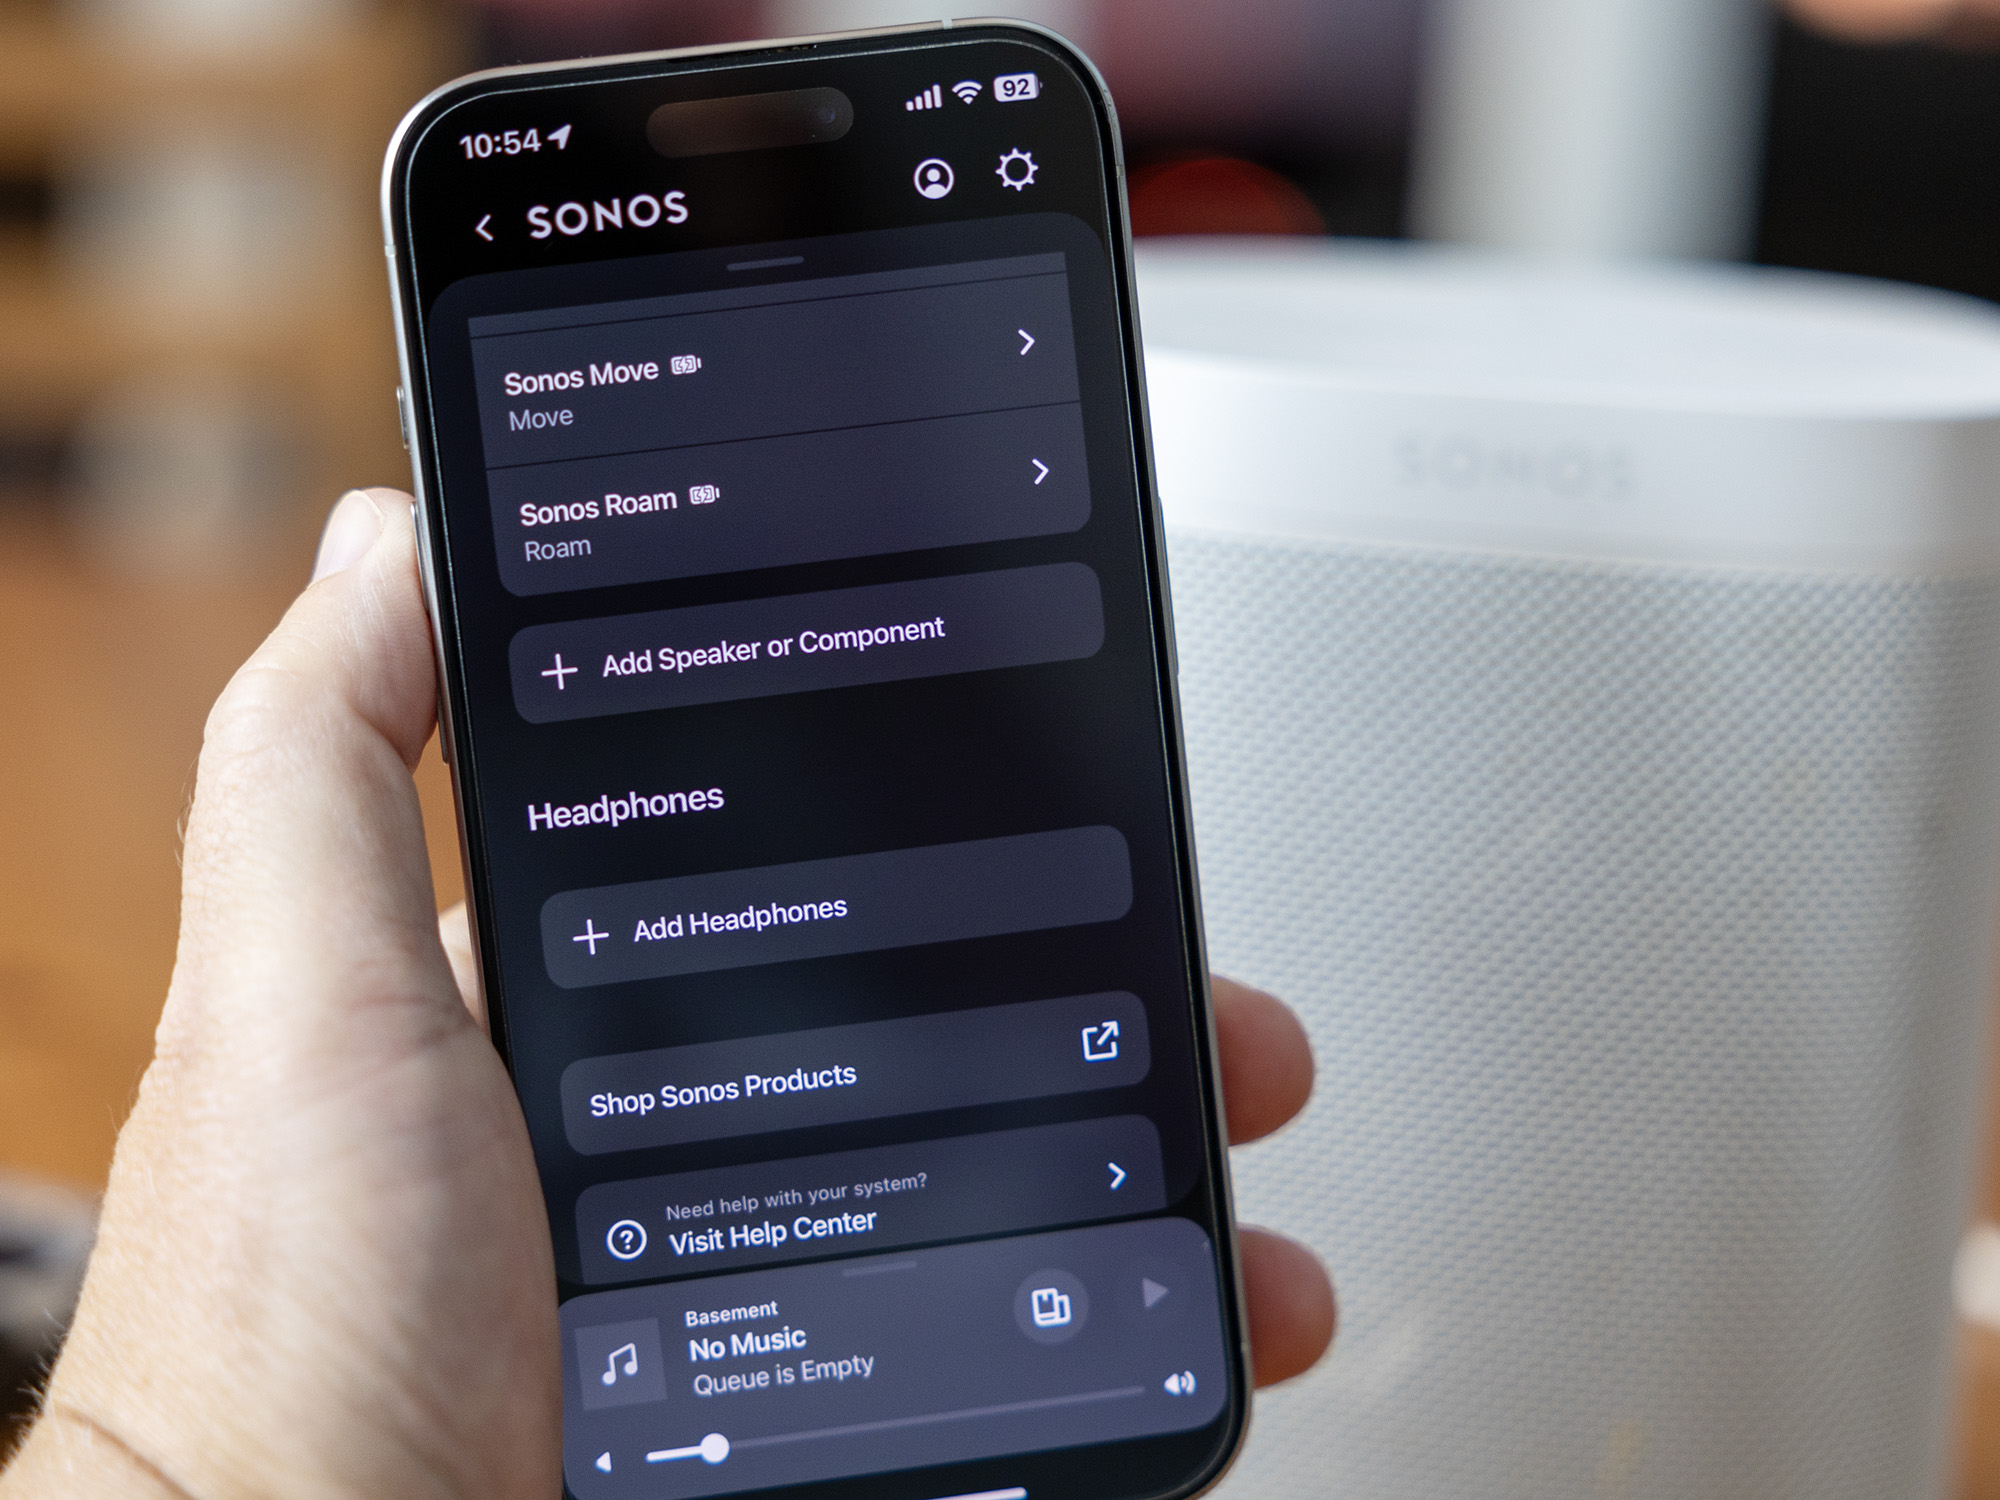 The Sonos app now shows an option for Bluetooth headphones, but it's not for just any old Bluetooth headphones.